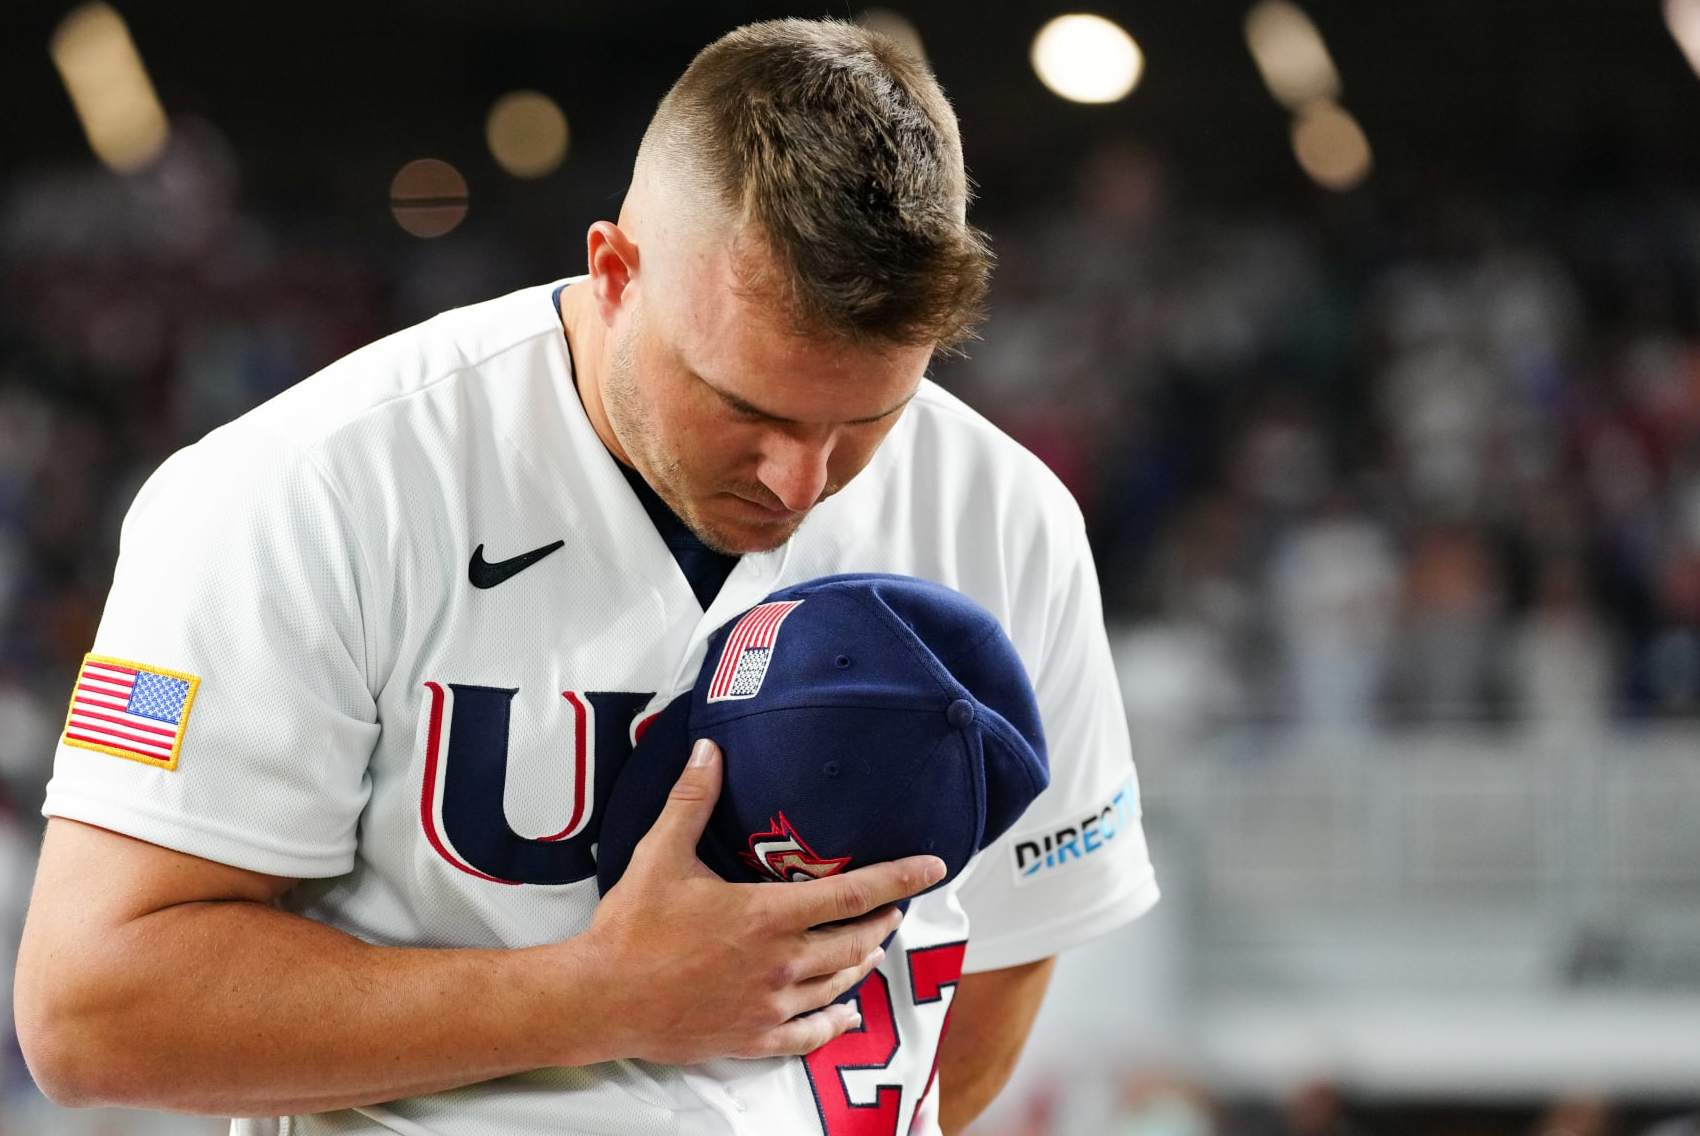 Angels' Mike Trout was catalyst for Team USA's World Baseball Classic roster